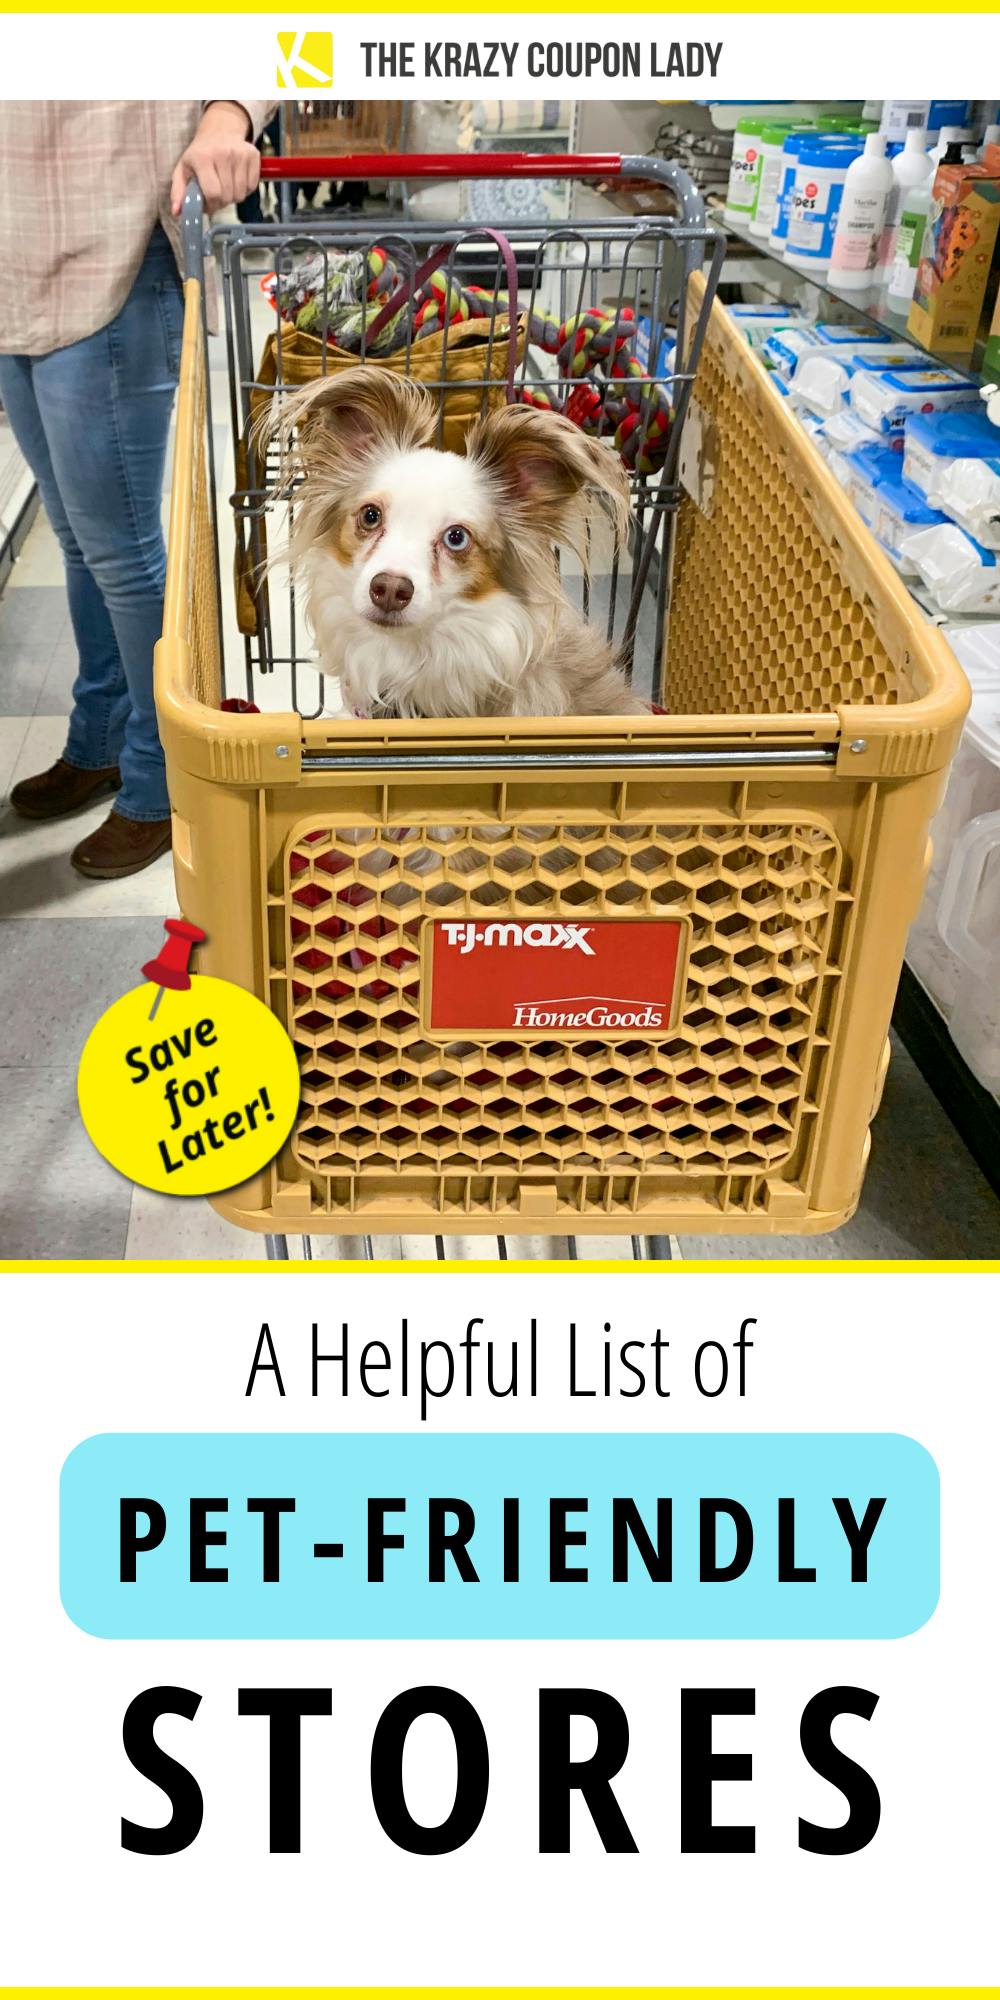 47 Dog-Friendly Stores Across the . - The Krazy Coupon Lady